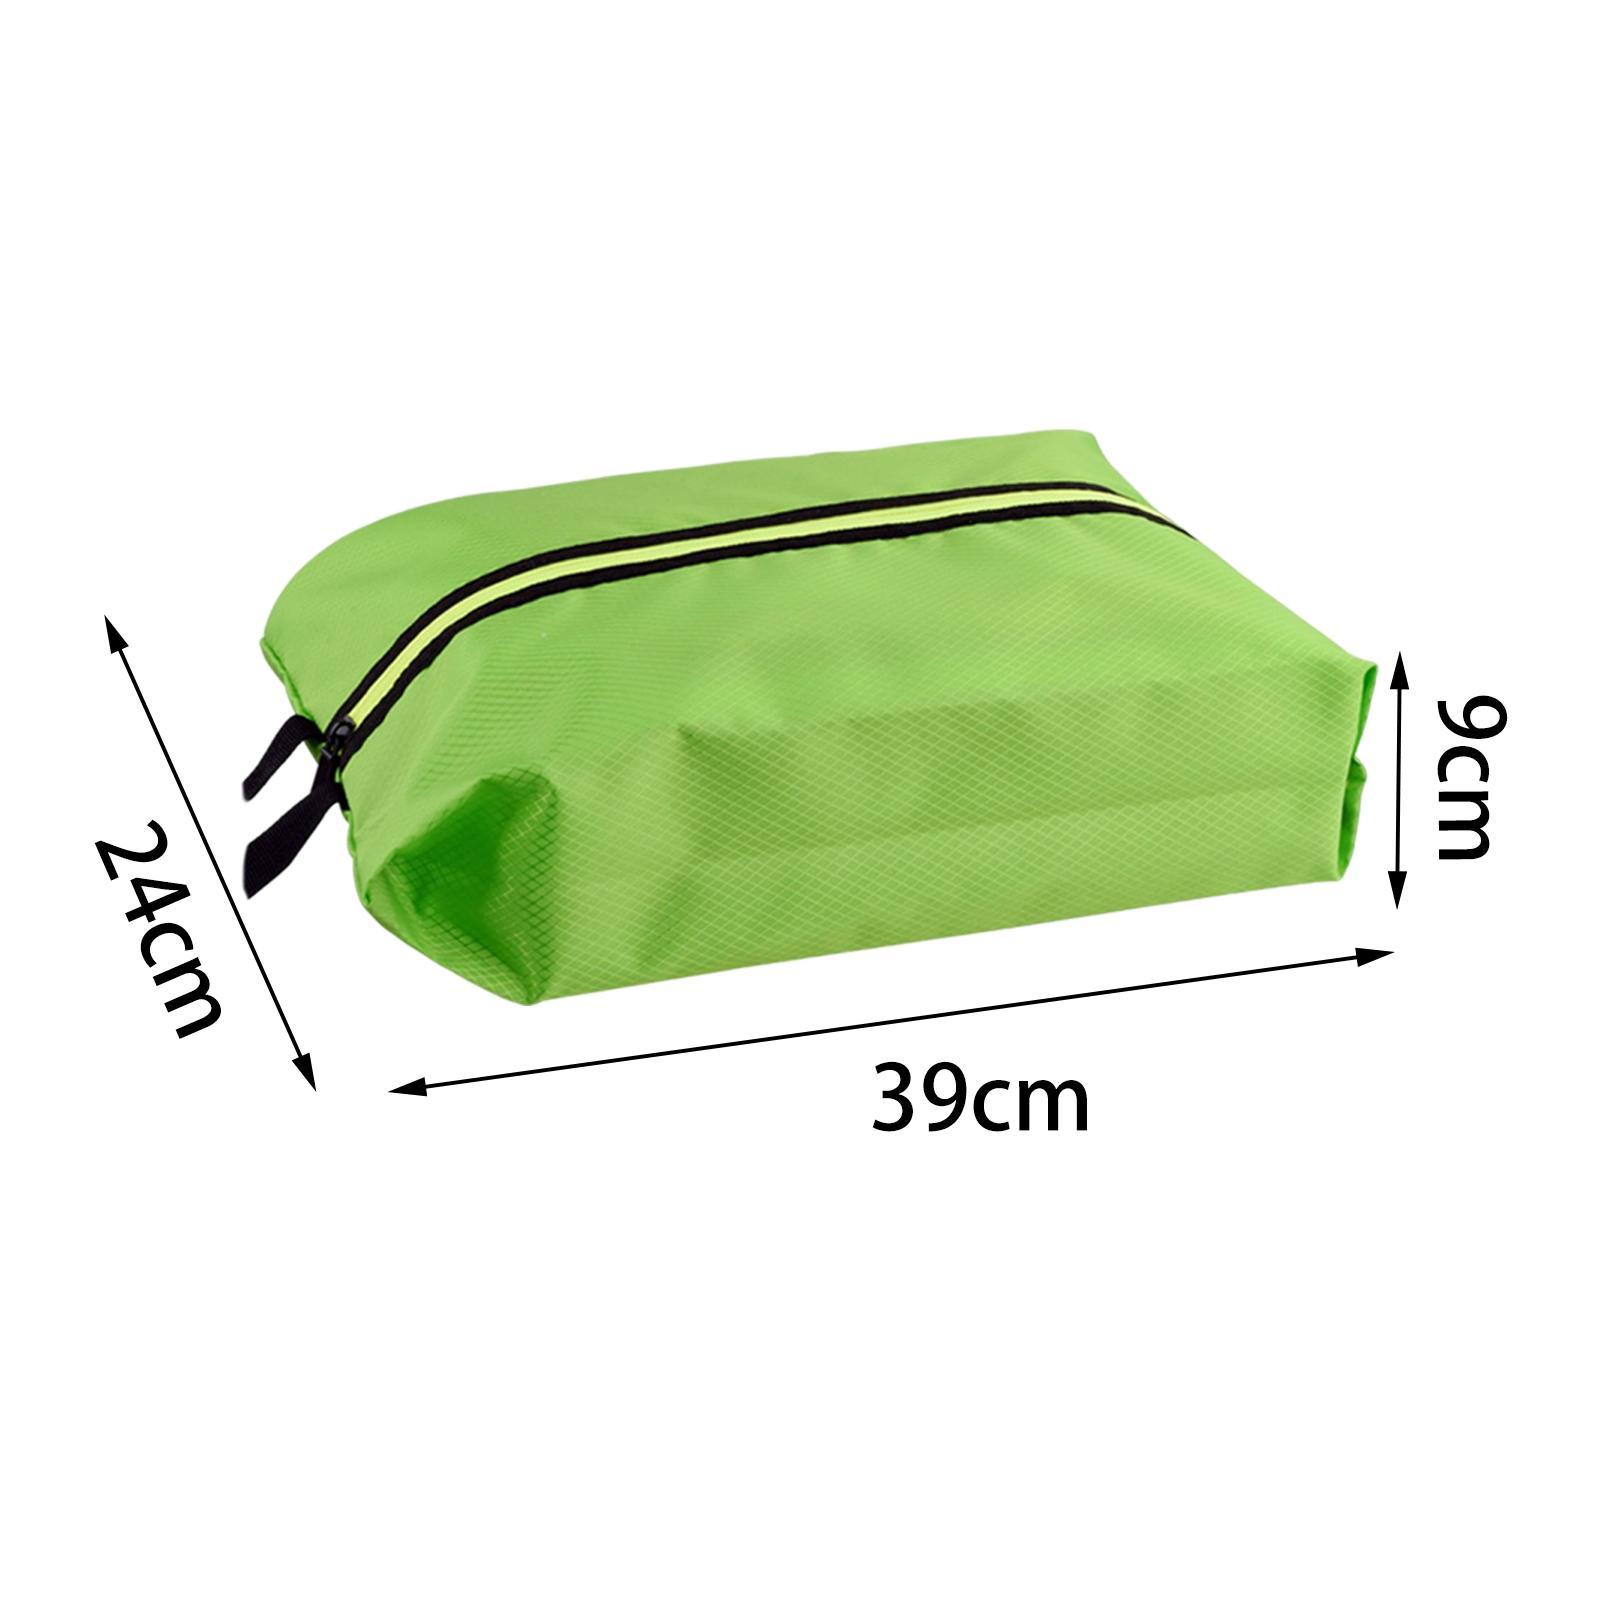 Portable Travel Shoes Storage Bag Foldable Lightweight for Home Travel Gym